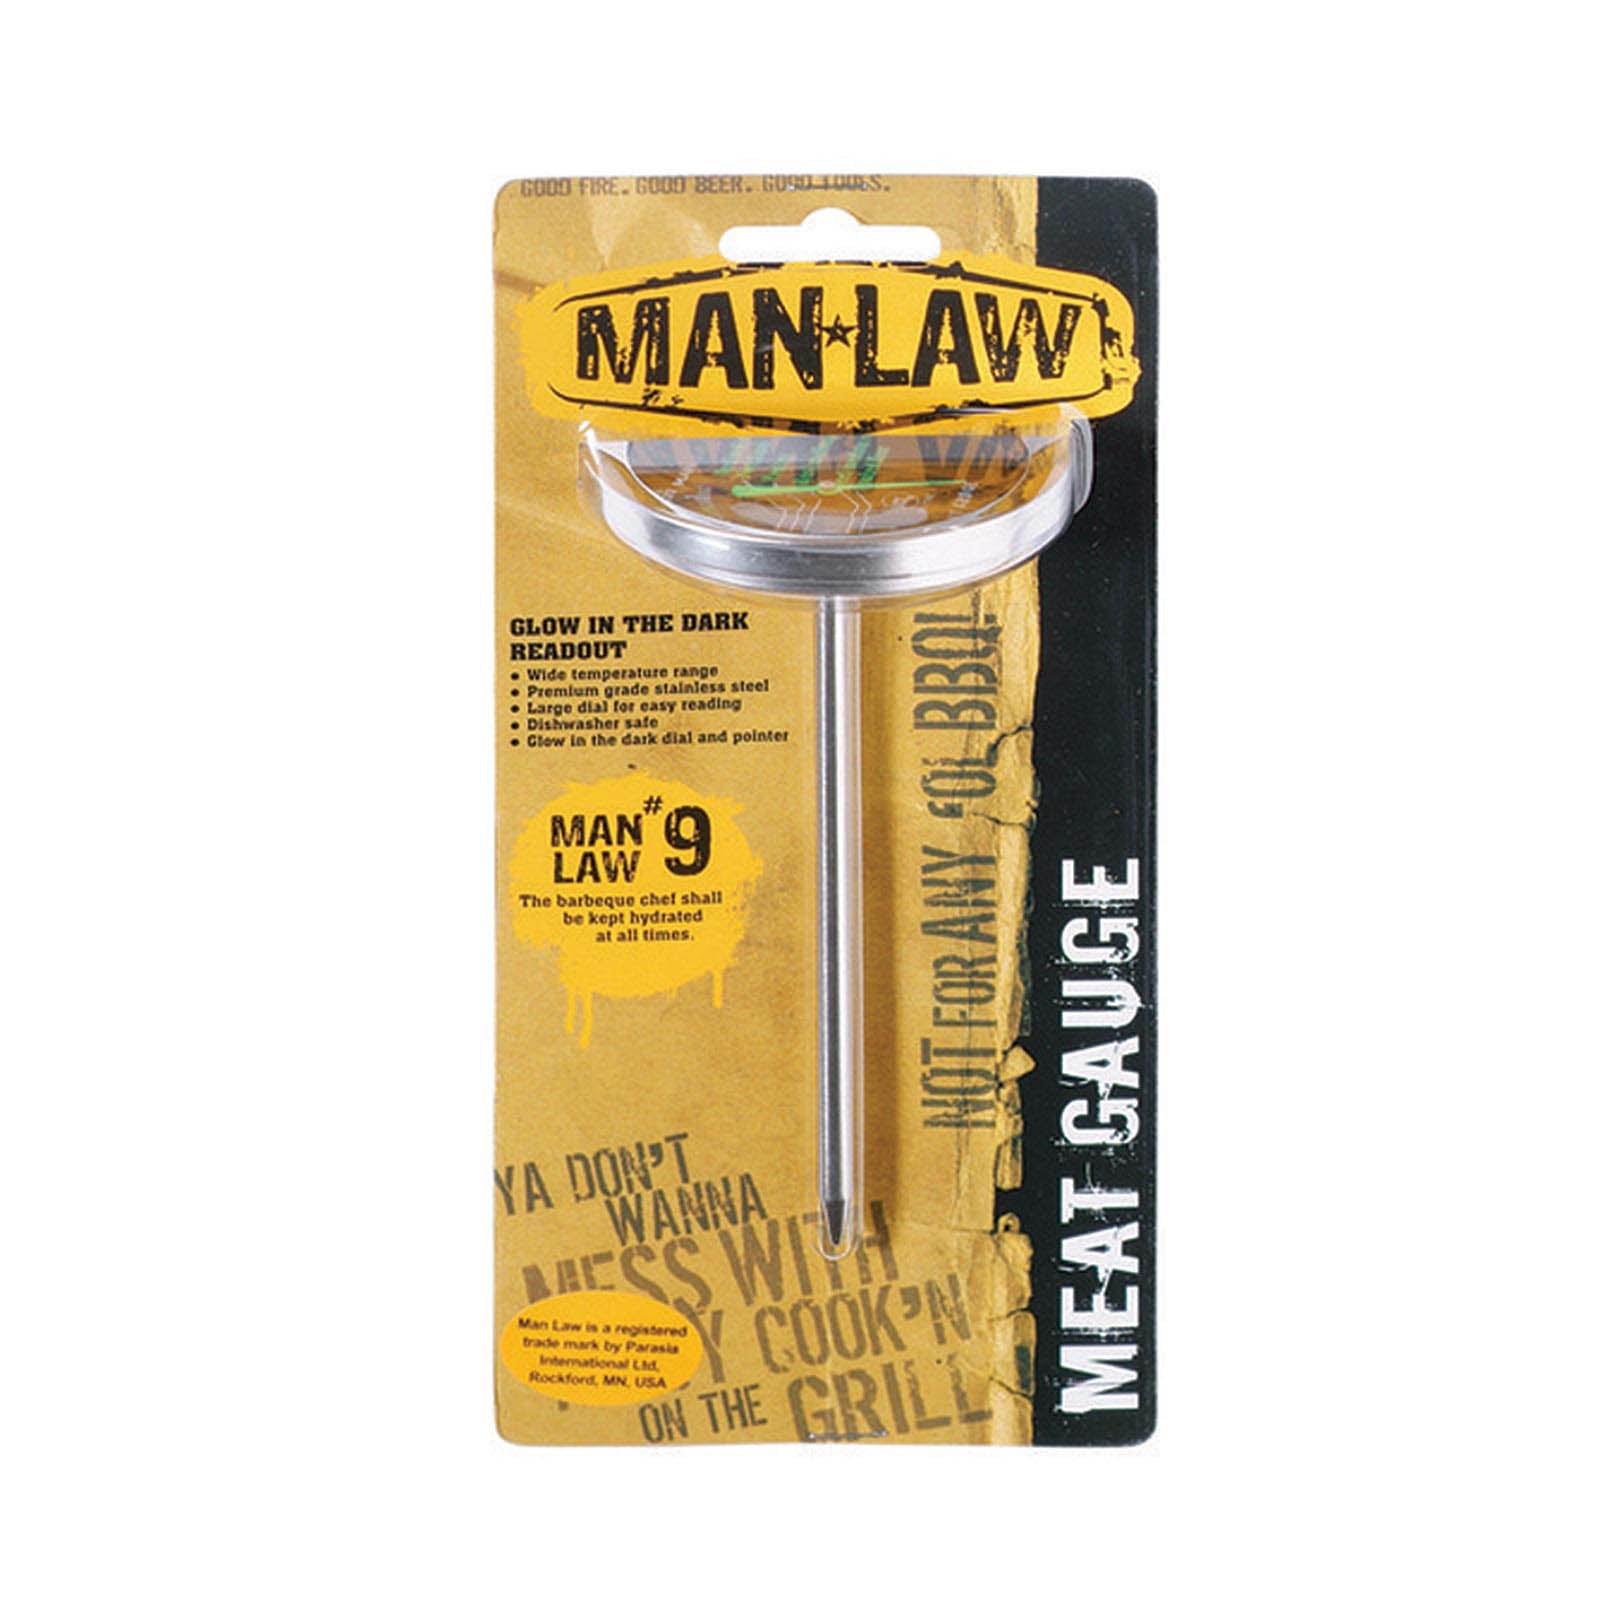 Man Law Meat Gauge Thermometer with Glow Dial - Range 40 to 80 Degrees Celsius - MAN-T720CBBQ